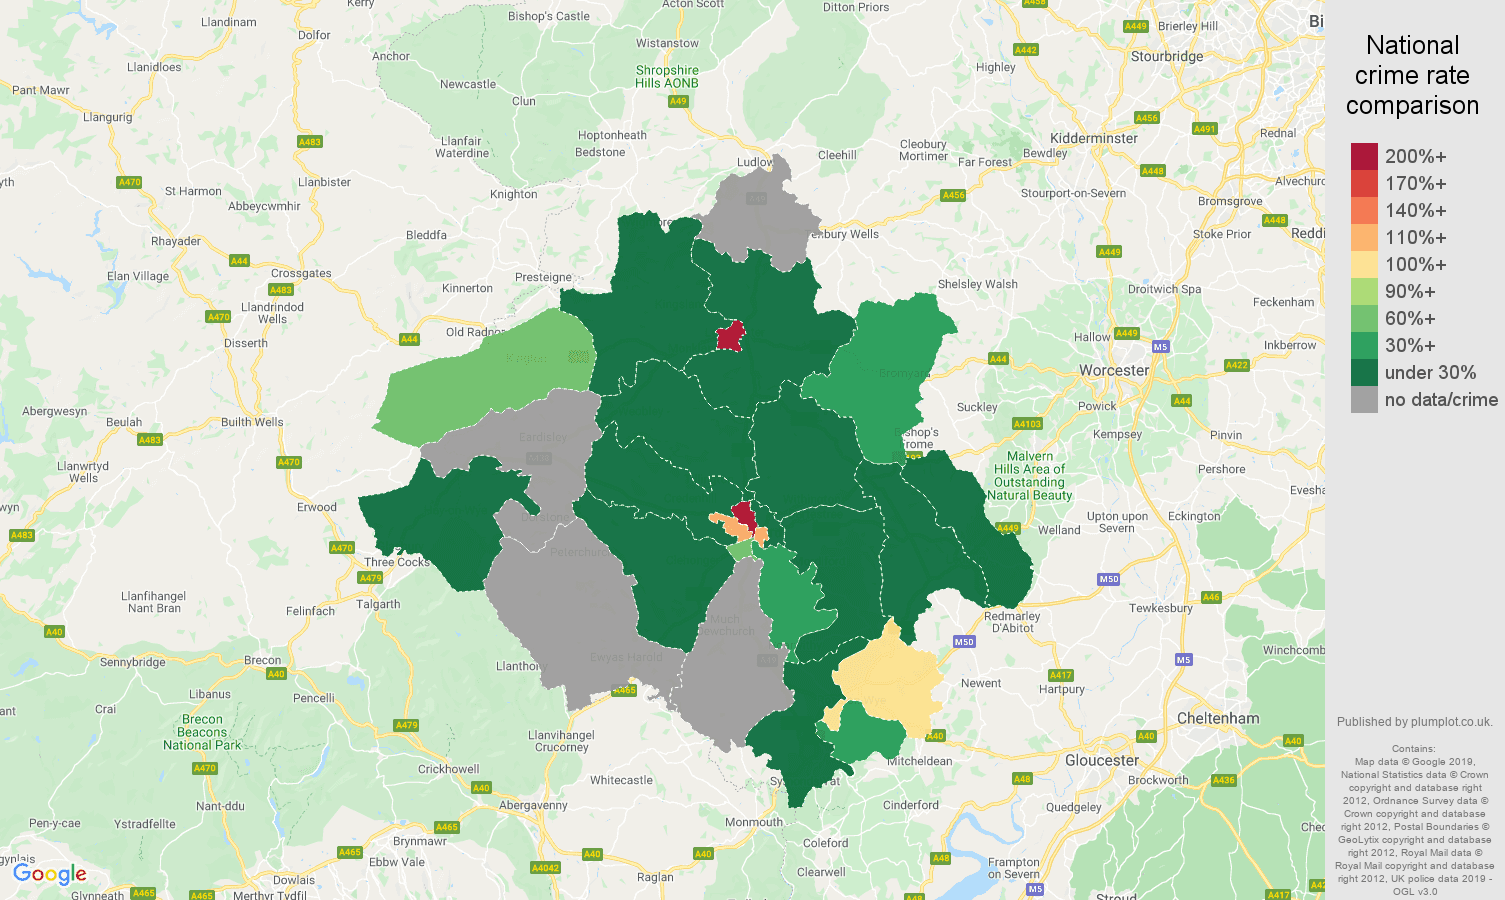 Herefordshire shoplifting crime rate comparison map